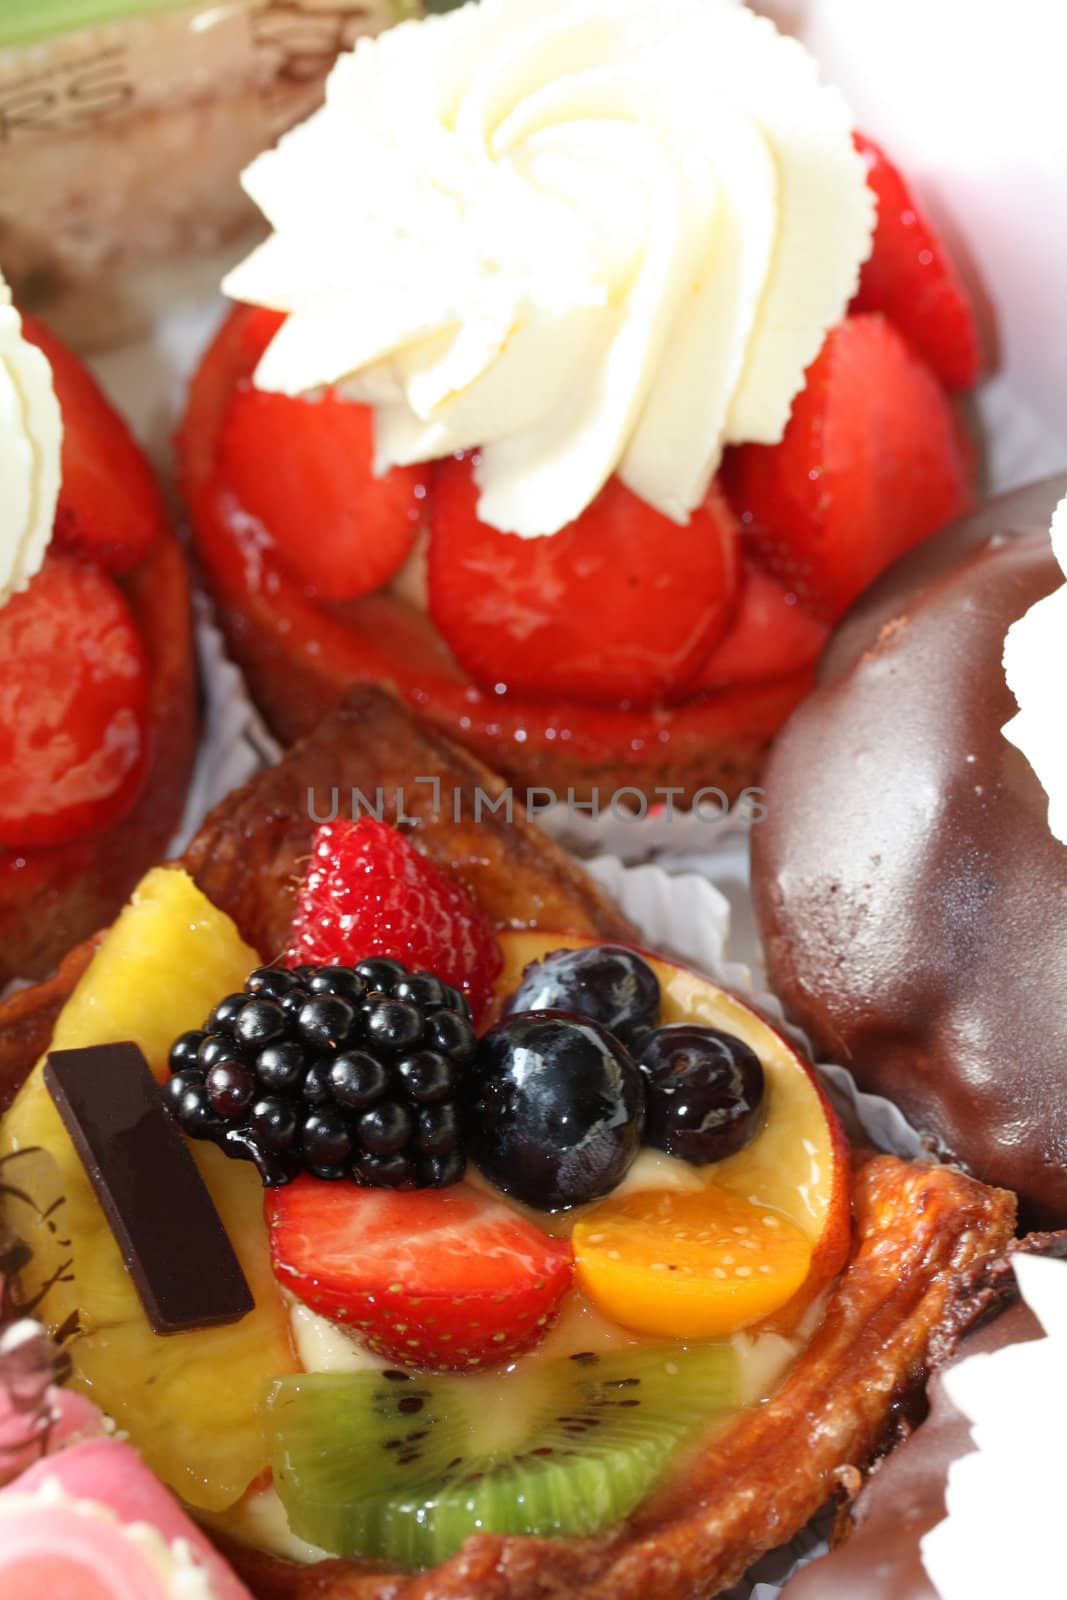 Delicious pastry cake with fresh fruit